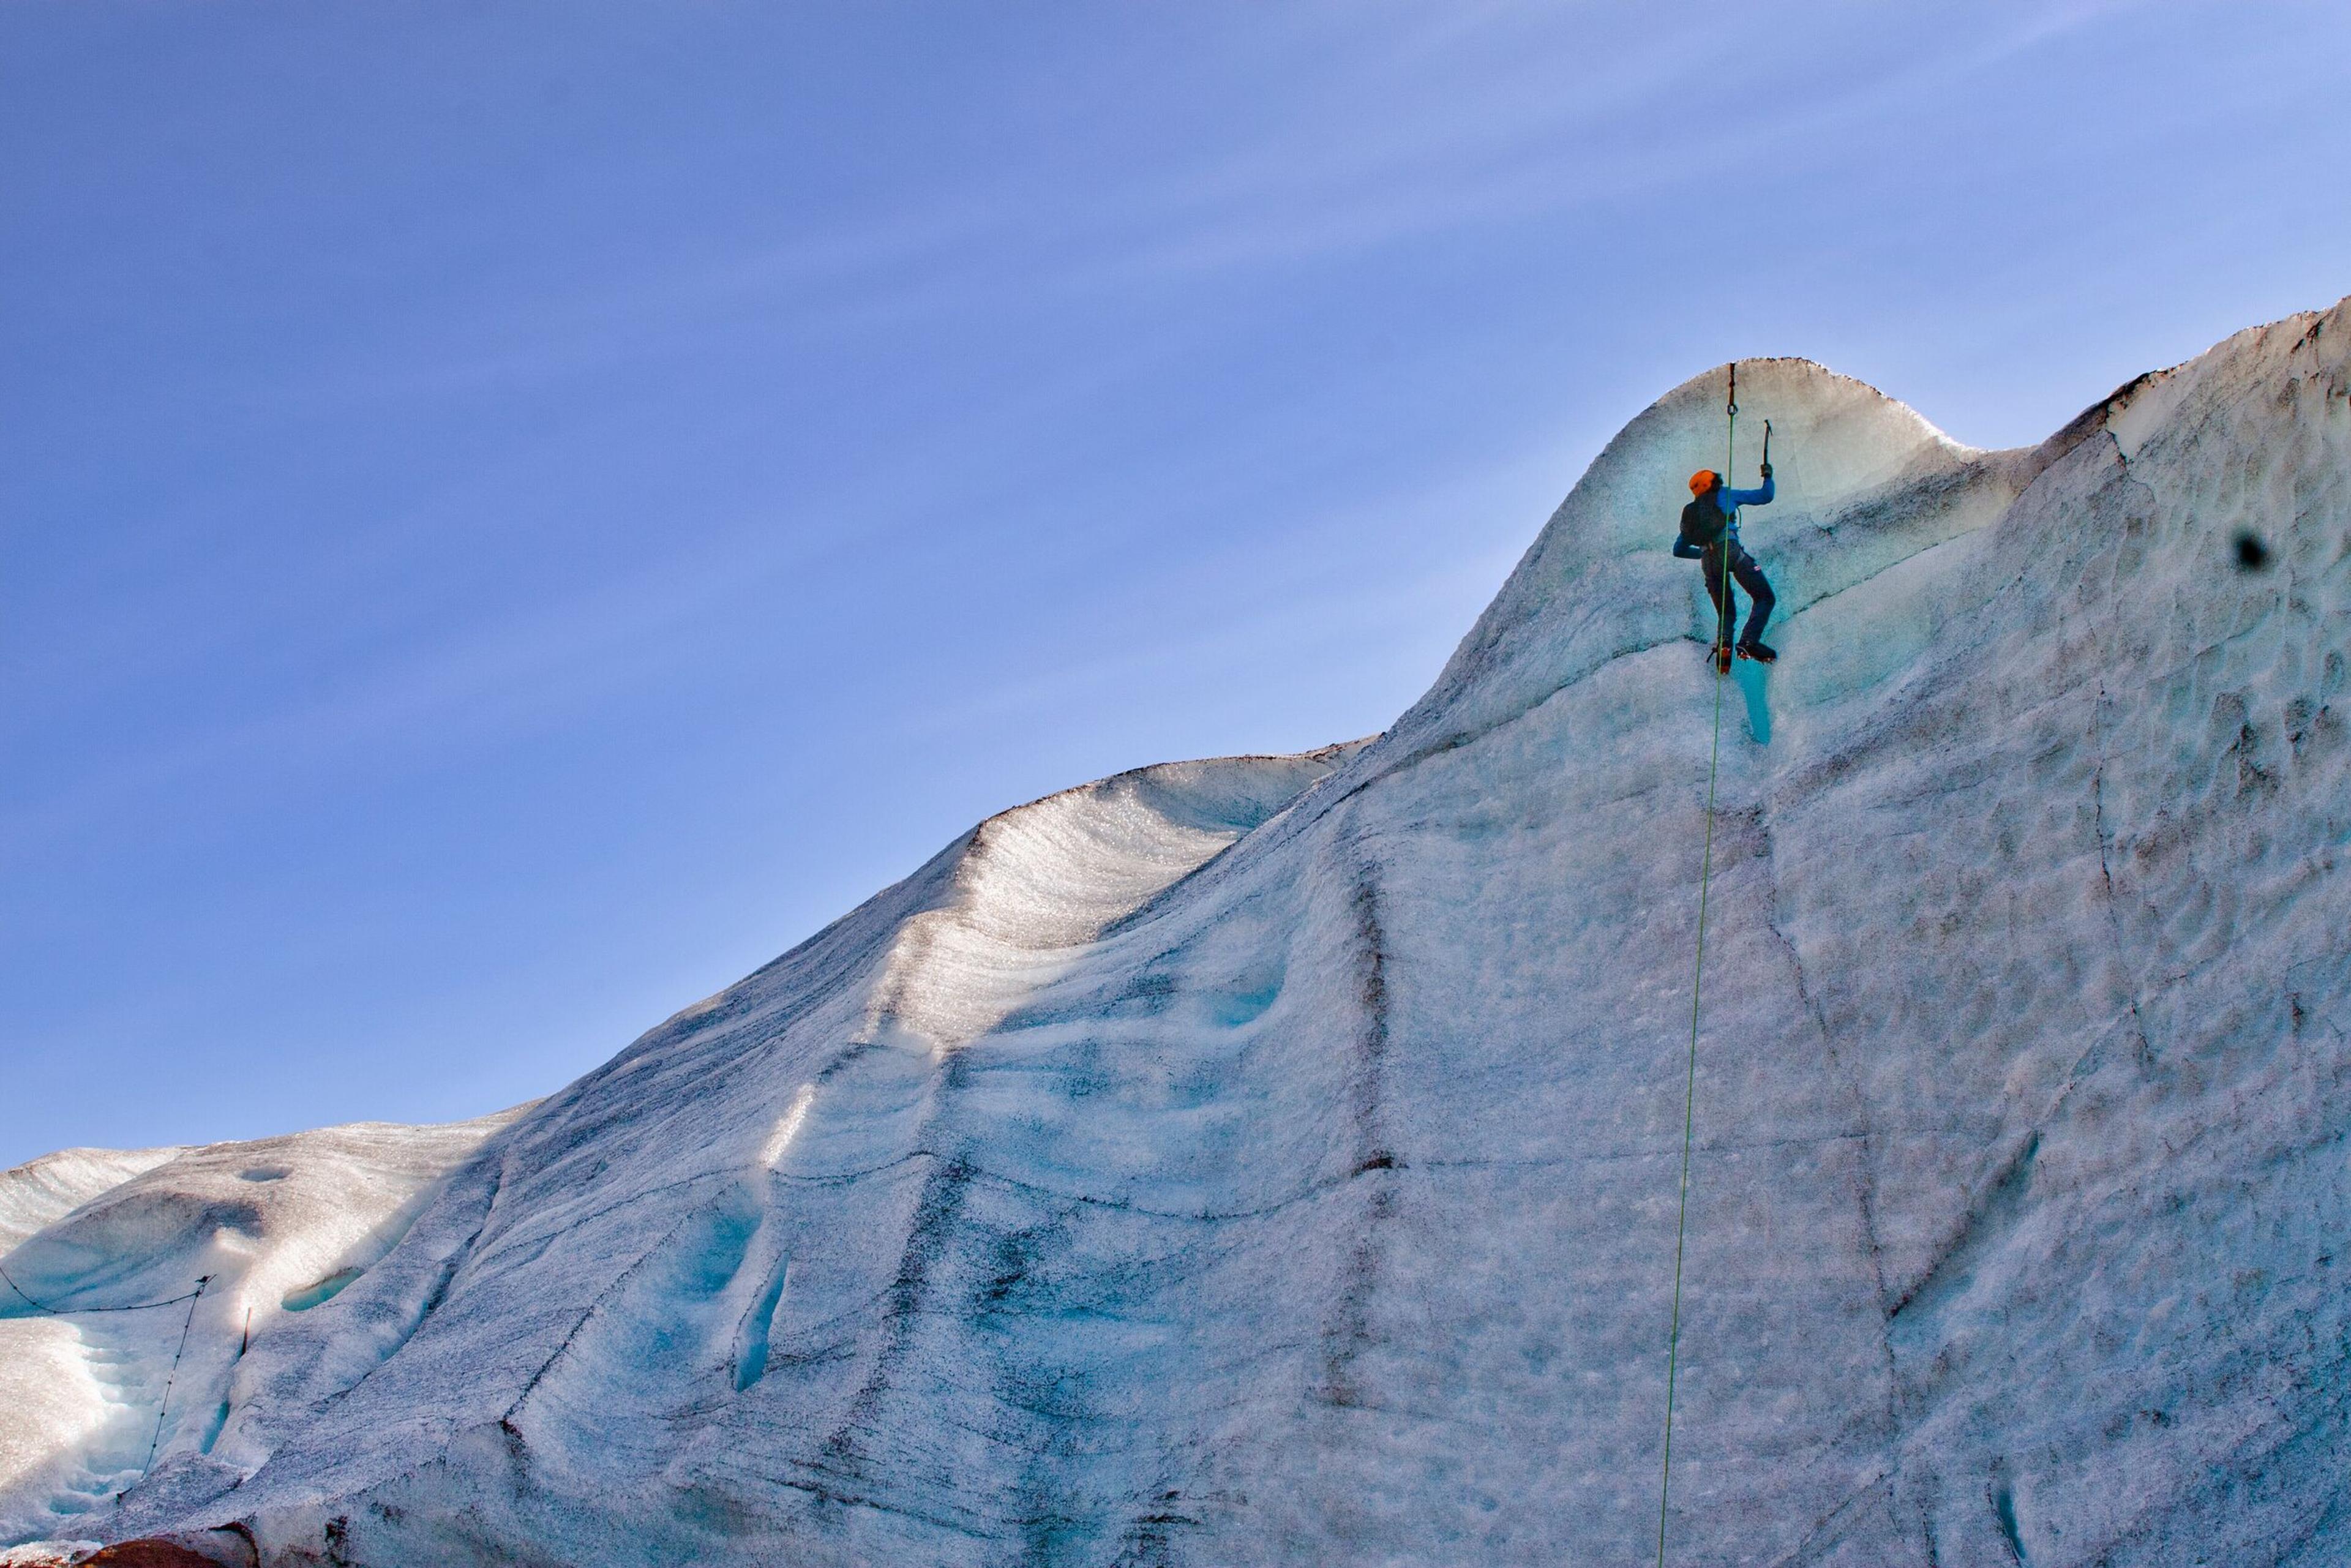 A person climbing up an ice wall using a rope and ice axes